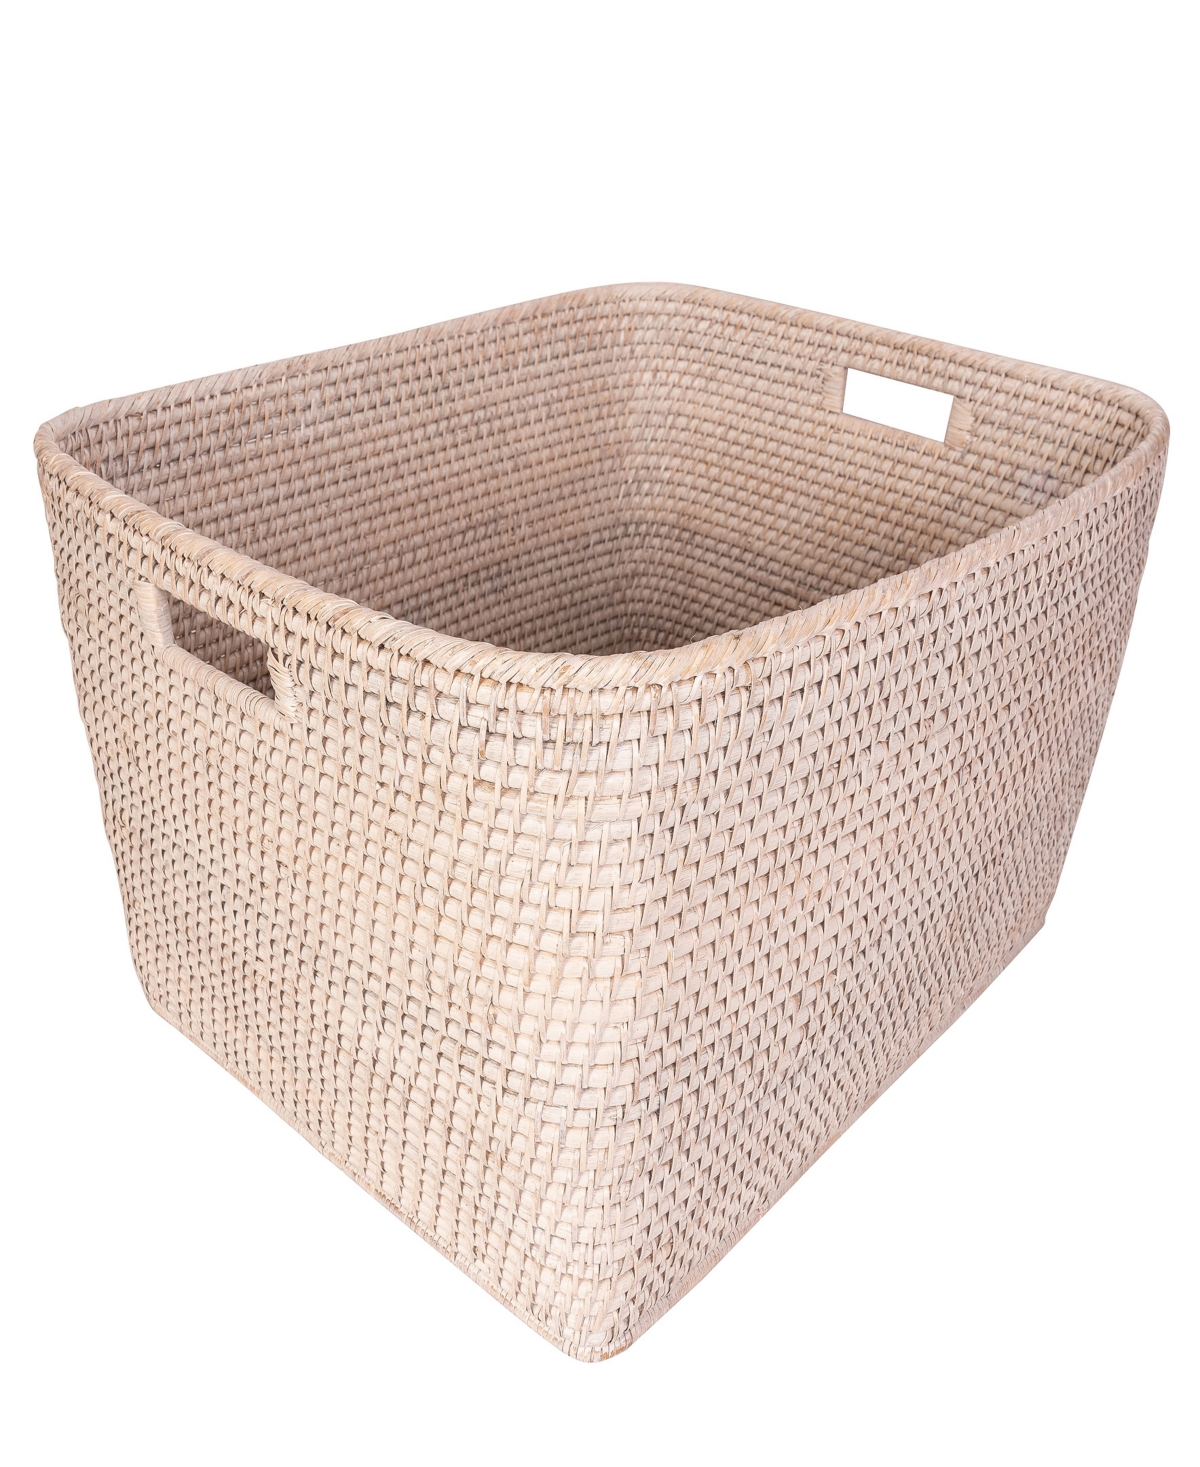 Artifacts Trading Company Saboga Home Family Basket With Cutout Handle In White Wash